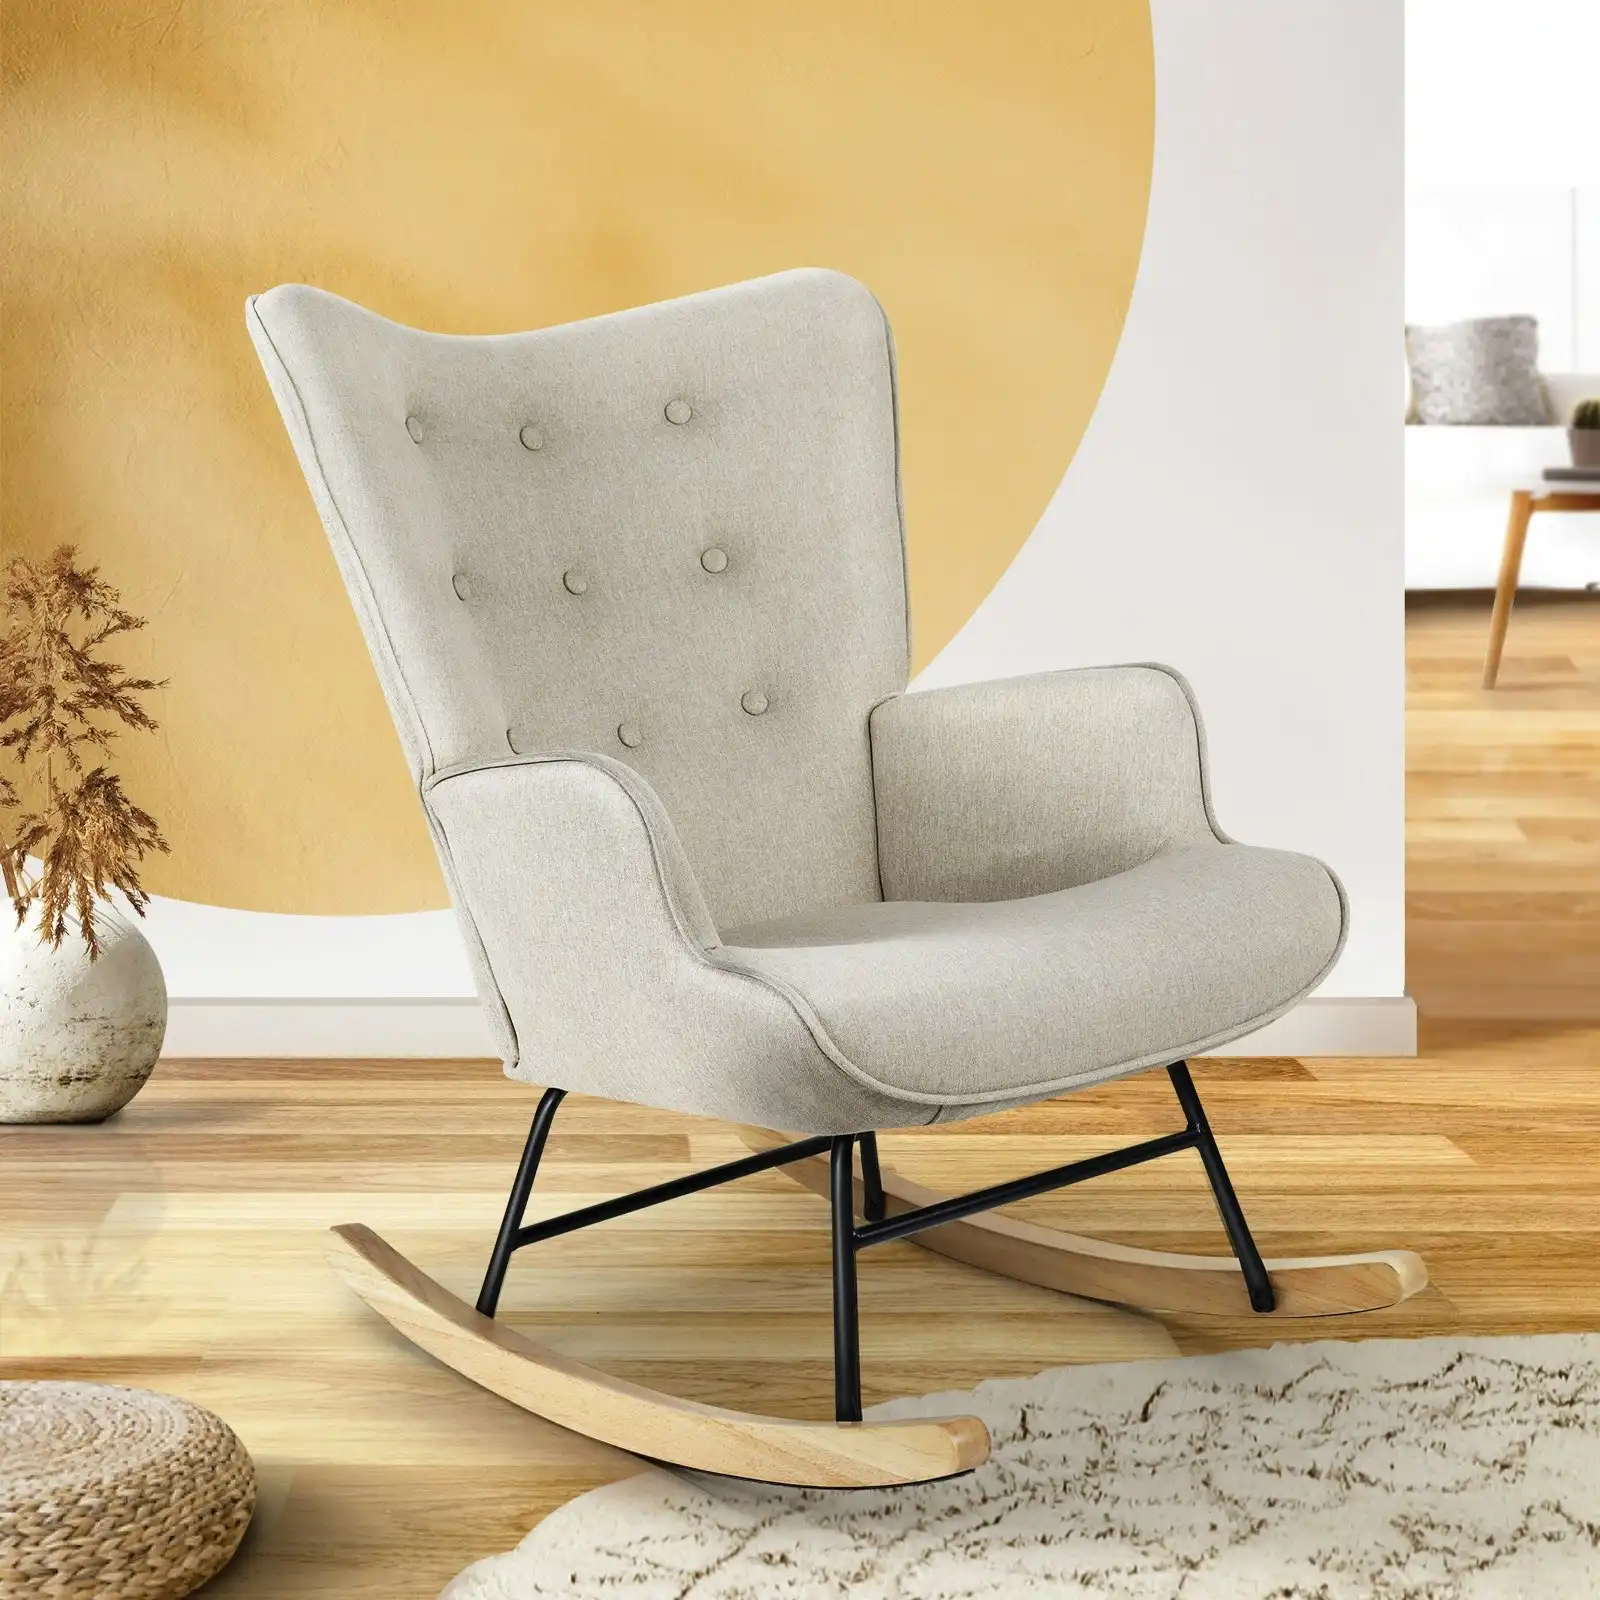 Oikiture Rocking Chair Nursing Armchair Linen Accent Chairs Upholstered Beige